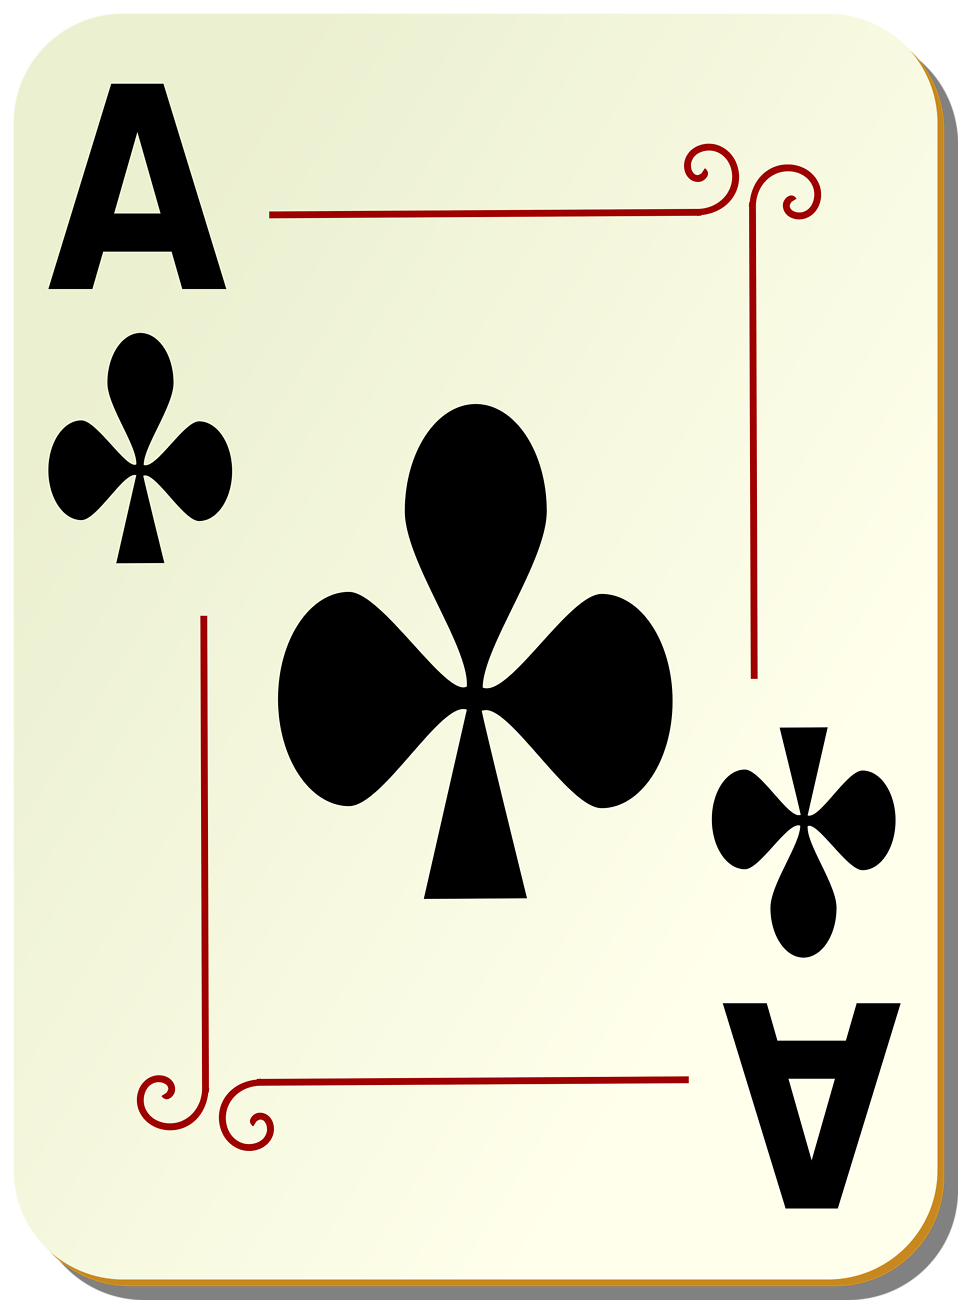 Playing Cards | Free Stock Photo | Illustration of an Ace of Clubs ...